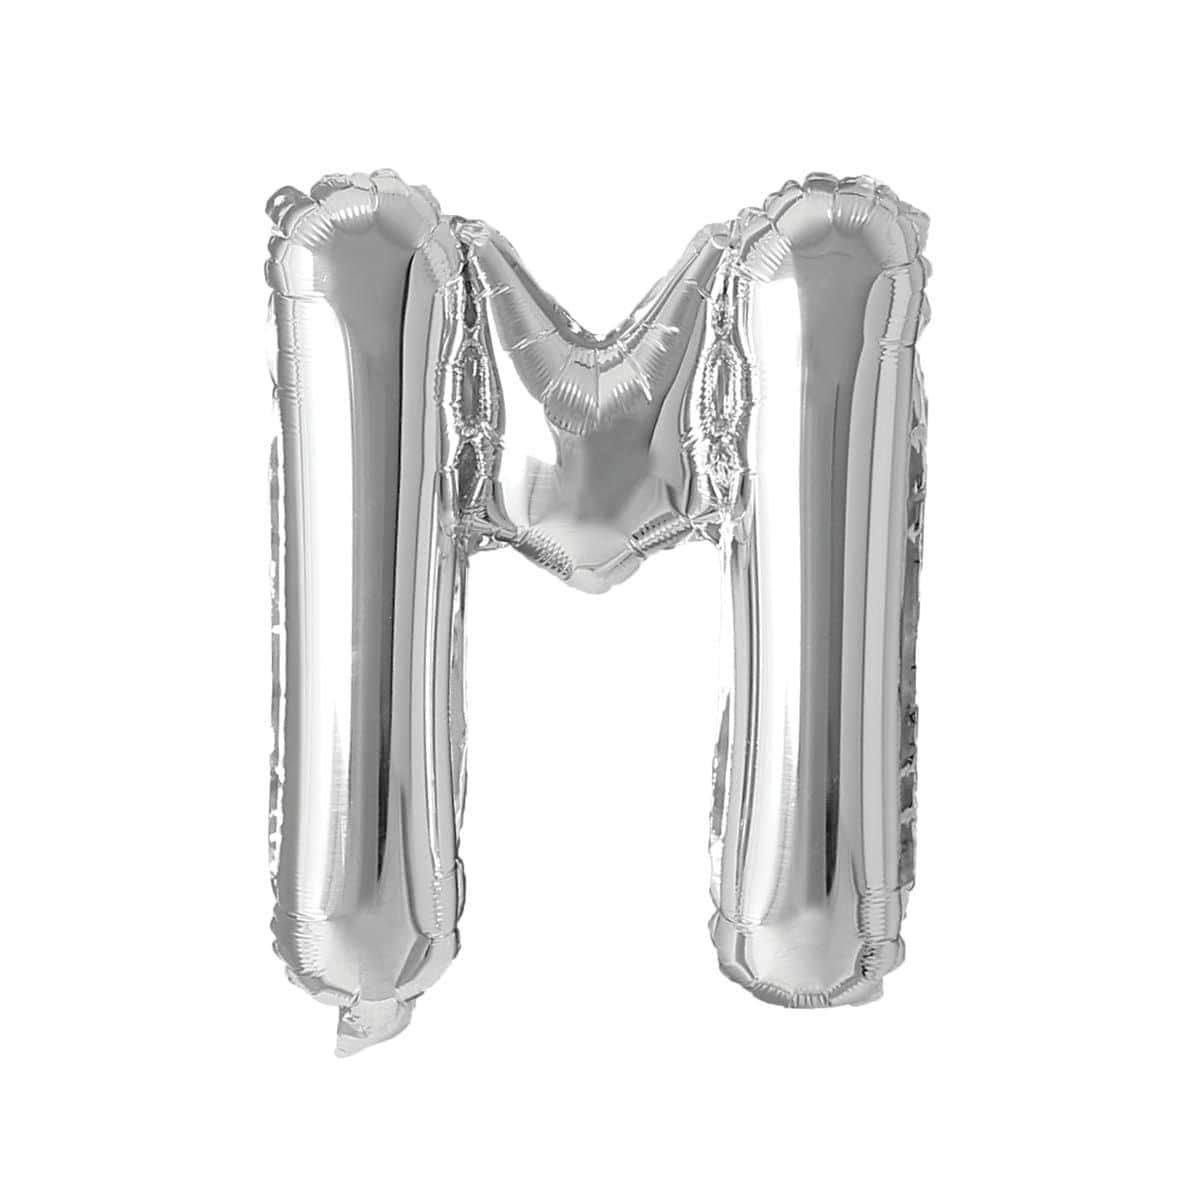 Buy Balloons Silver Letter M Foil Balloon, 16 Inches sold at Party Expert